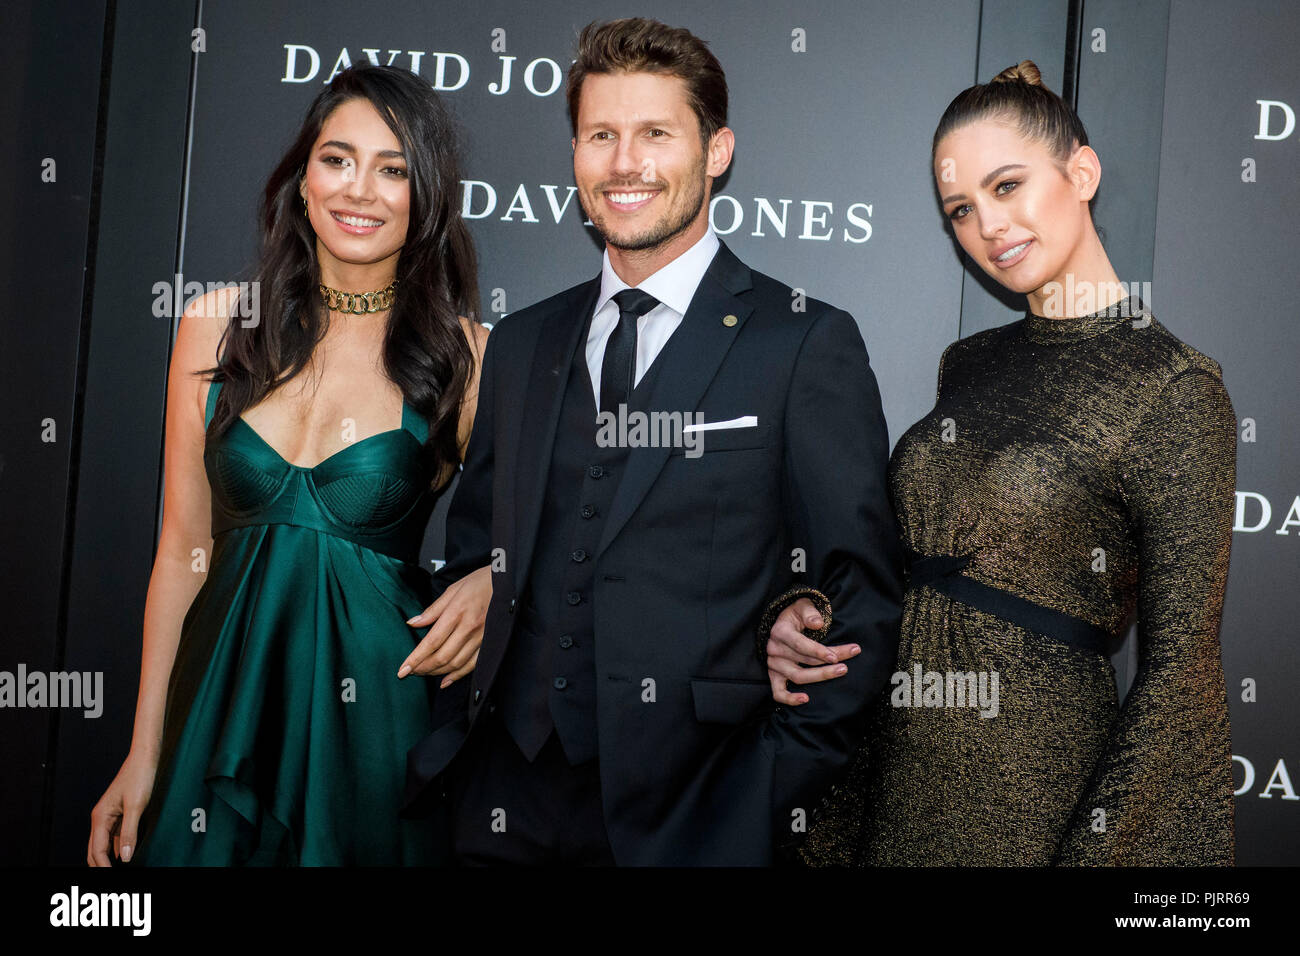 David Jones Ambassadors (L-R) Jessica Gomes, Jason Dundas and Jesinta Campbell poses for photographs during celebrations for the opening of  a new signature ‘boutique’ store in Barangaroo South on November 2, 2016 in Sydney, Australia.   (Photo by Hugh Peterswald) Stock Photo